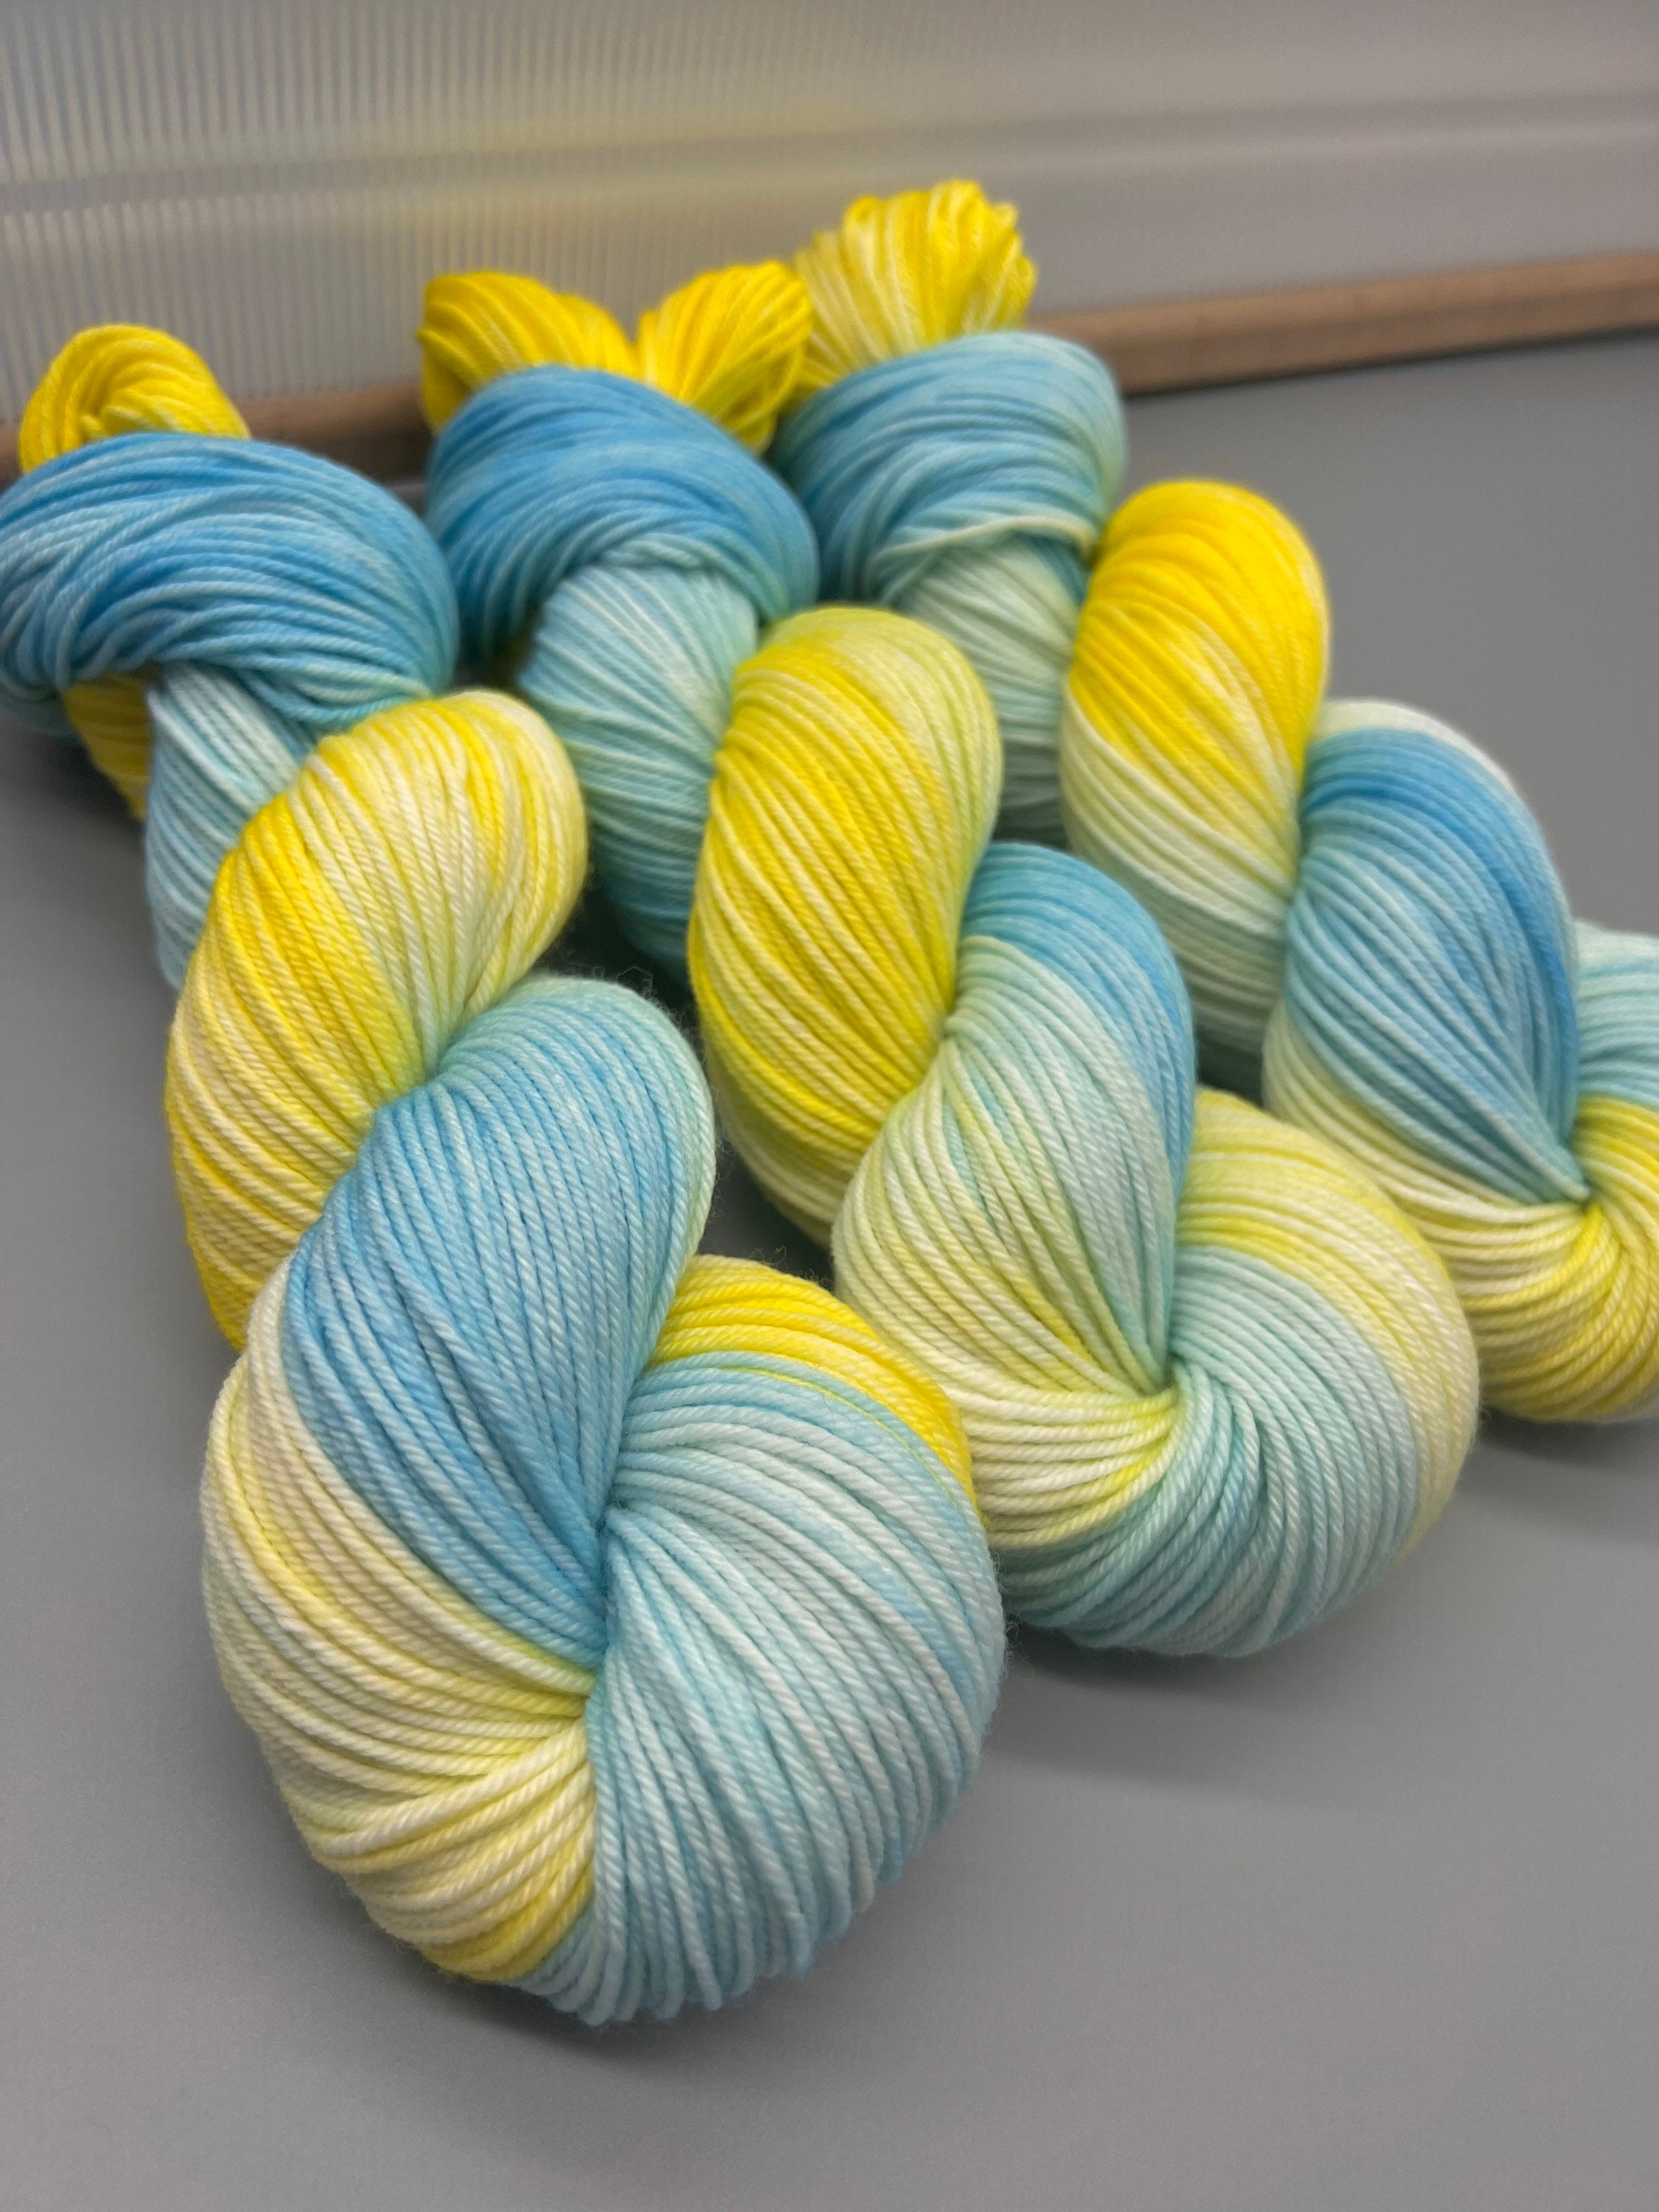  3x60g Yellow+White+Blue Yarn for Crocheting and